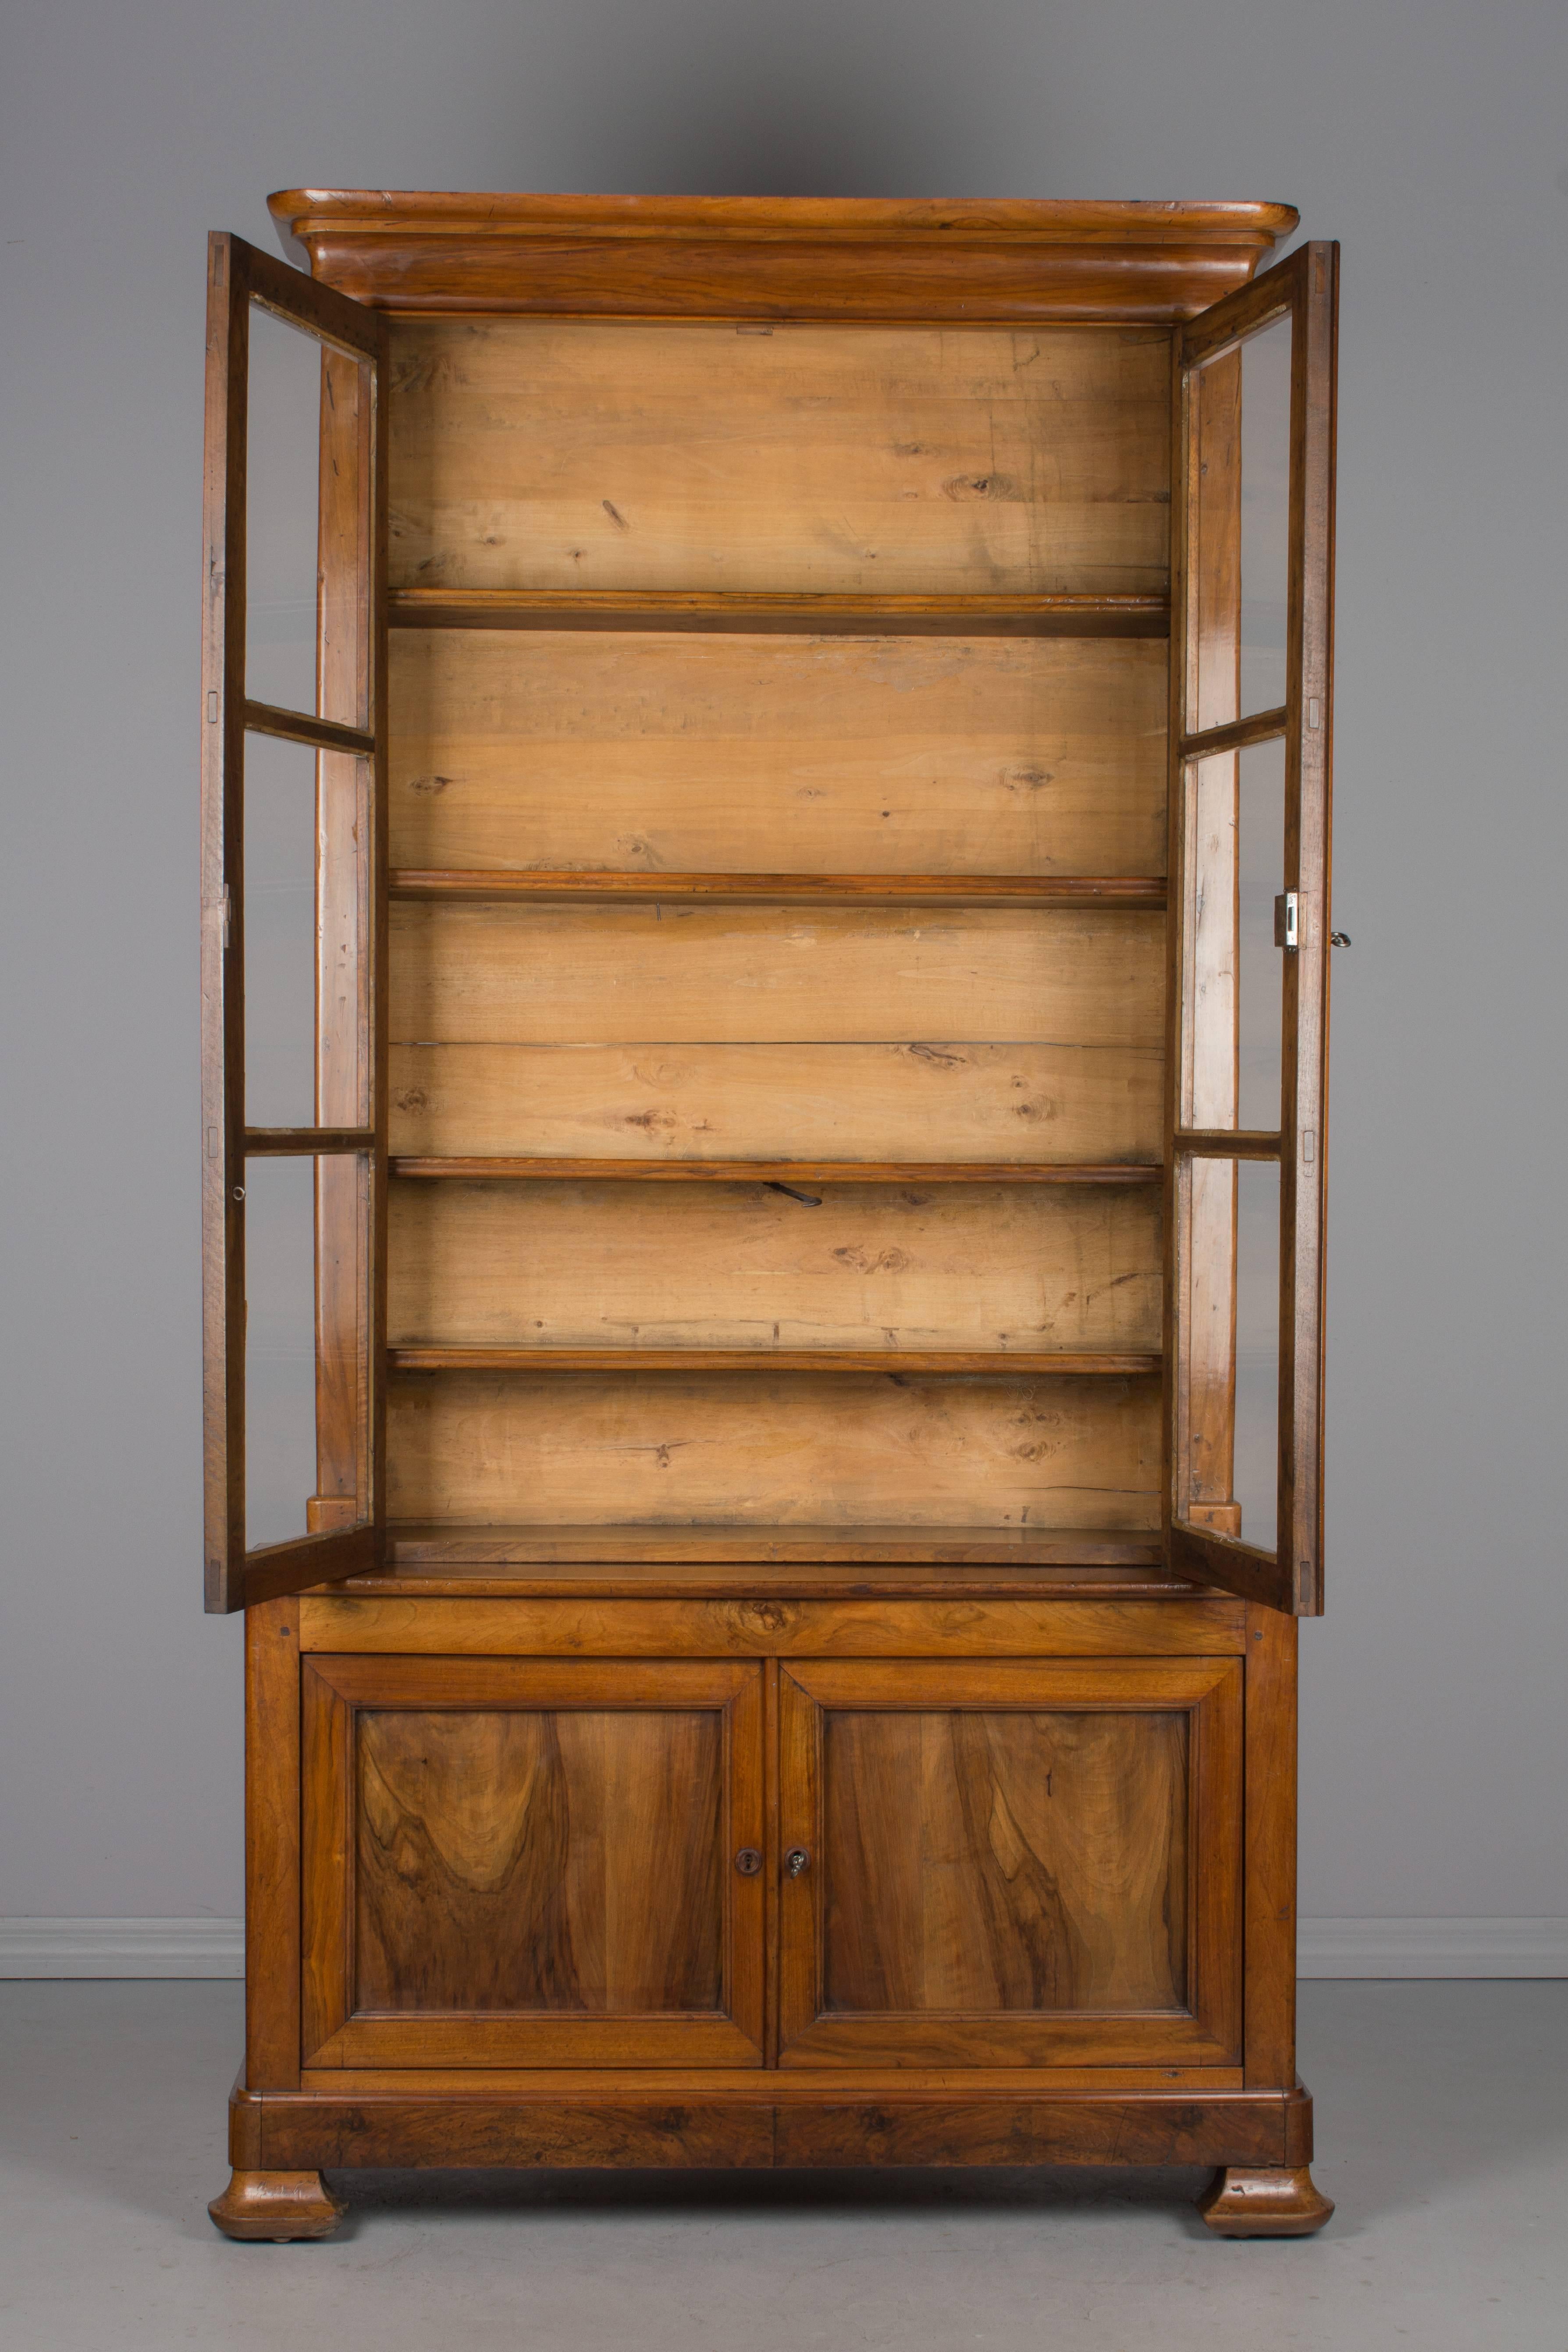 Hand-Crafted 19th Century Louis Philippe Bibliotheque or Bookcase